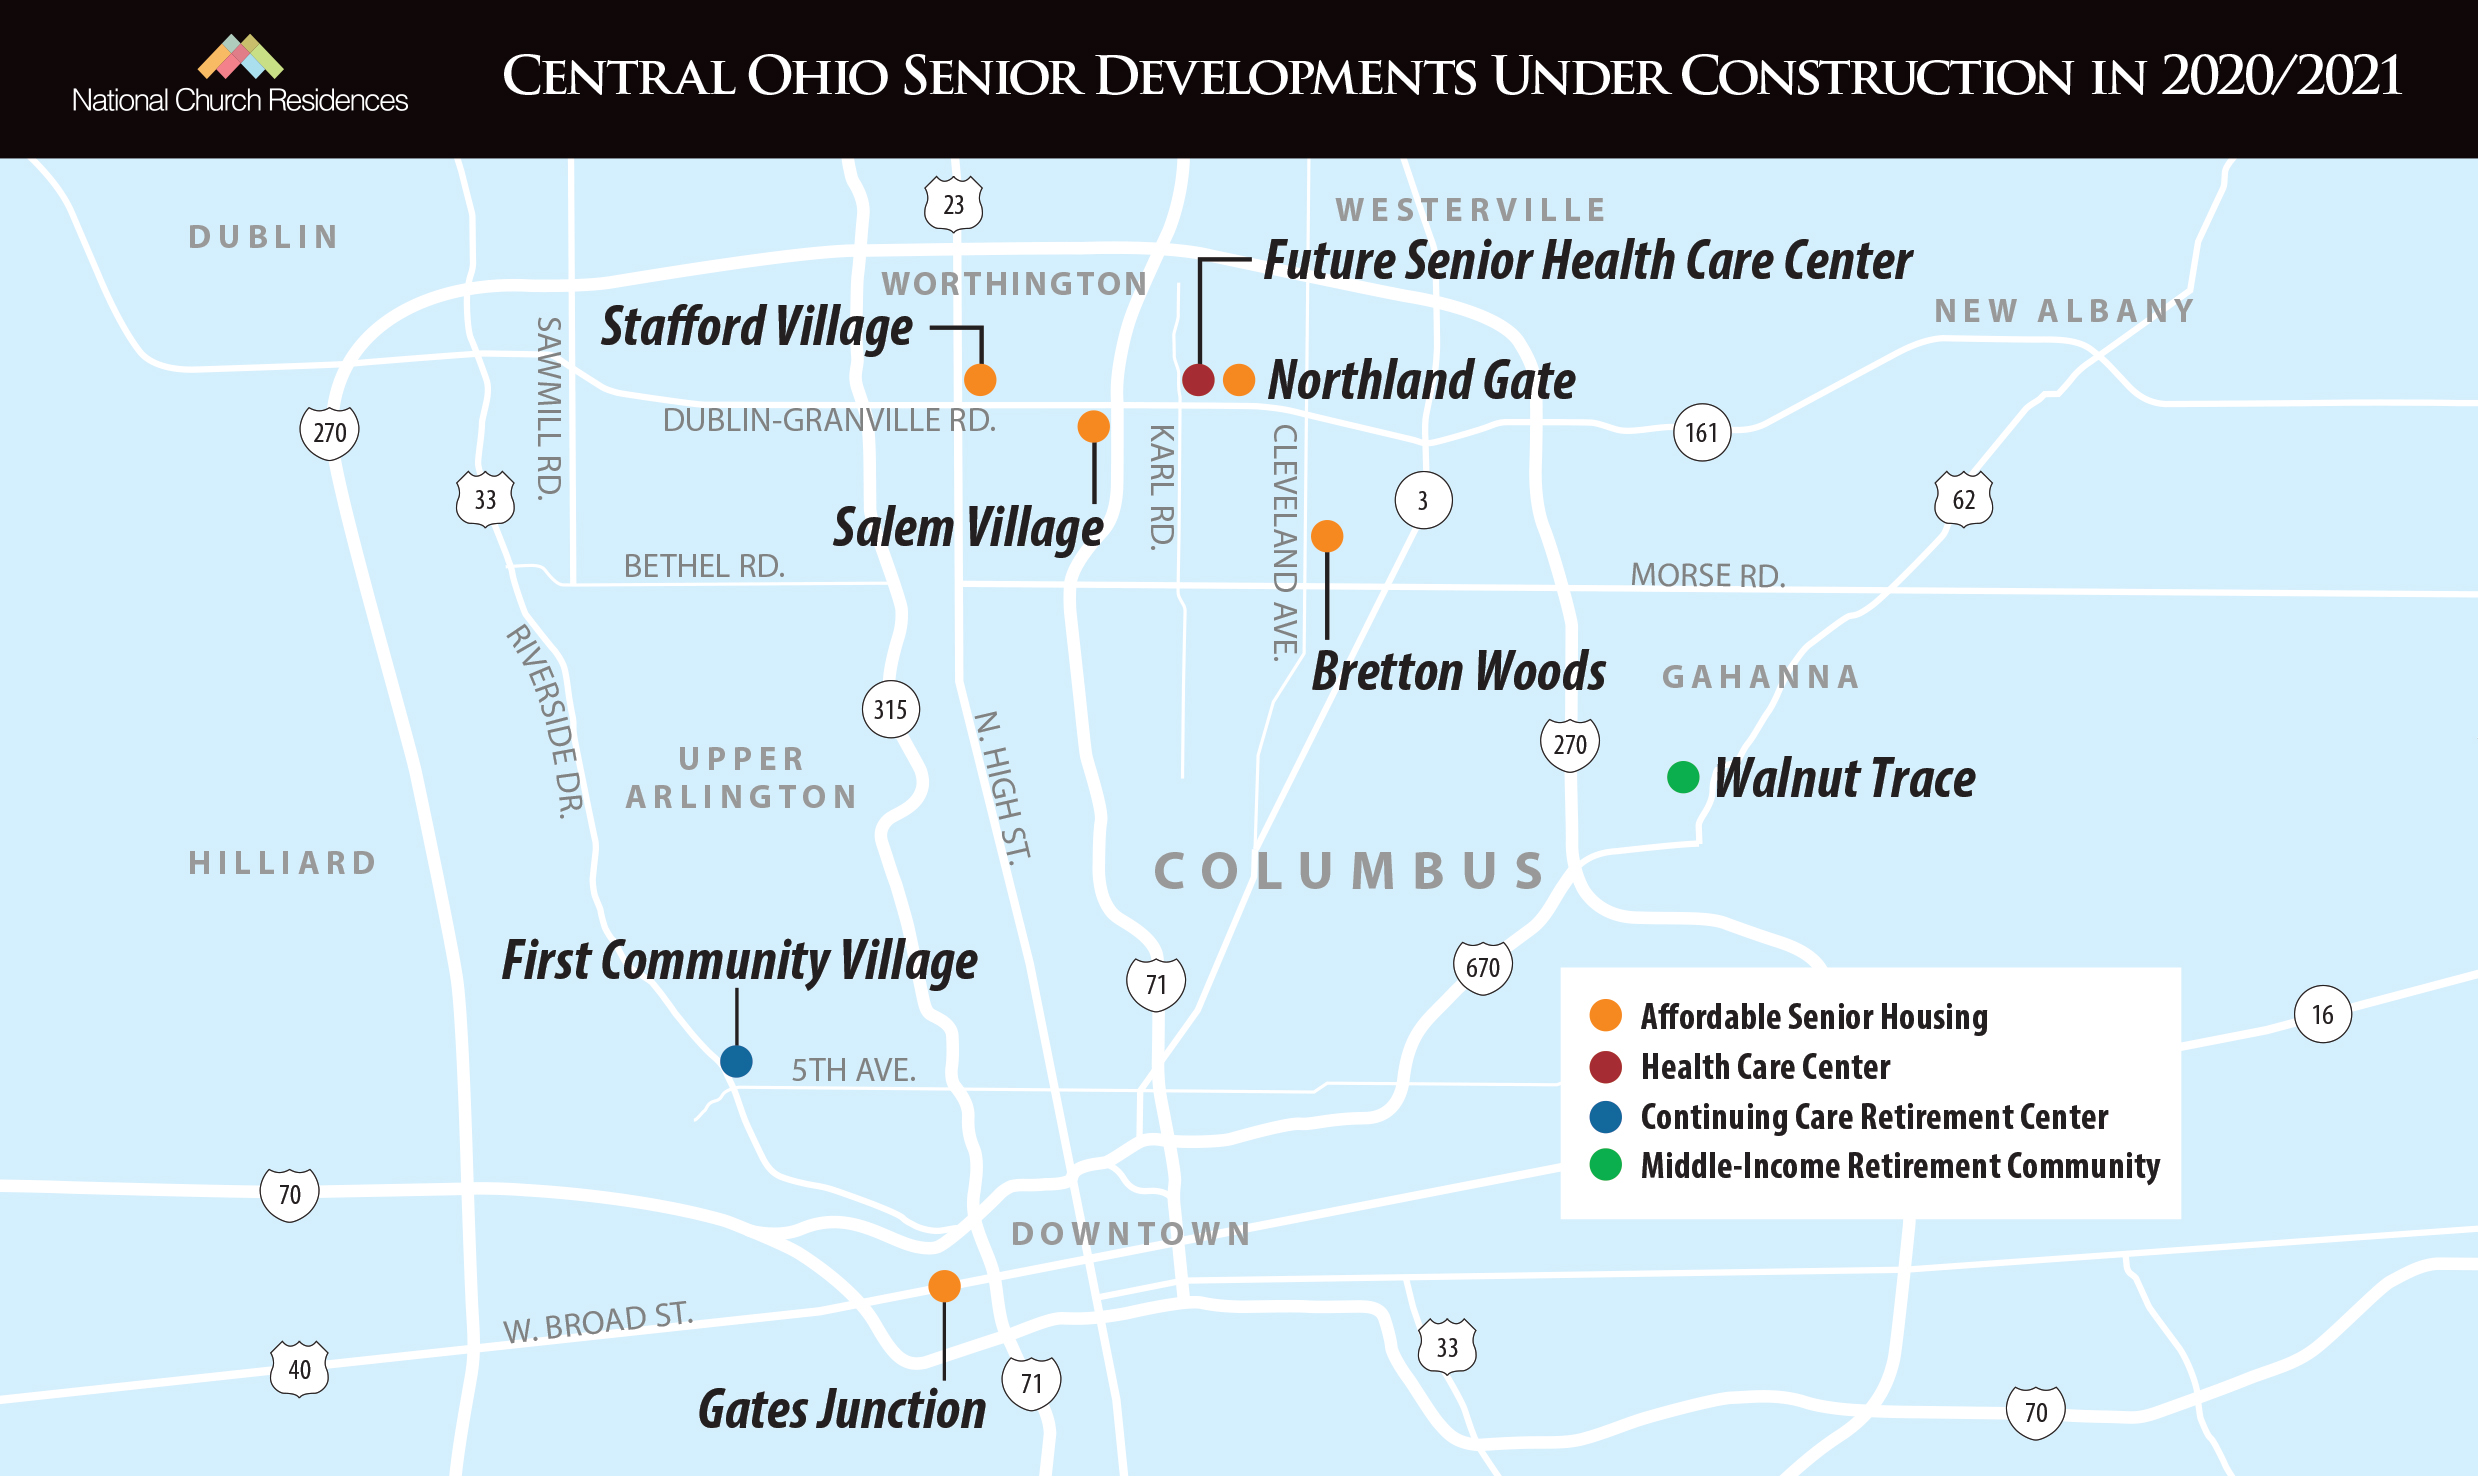 Construction and redevelopment expand sign